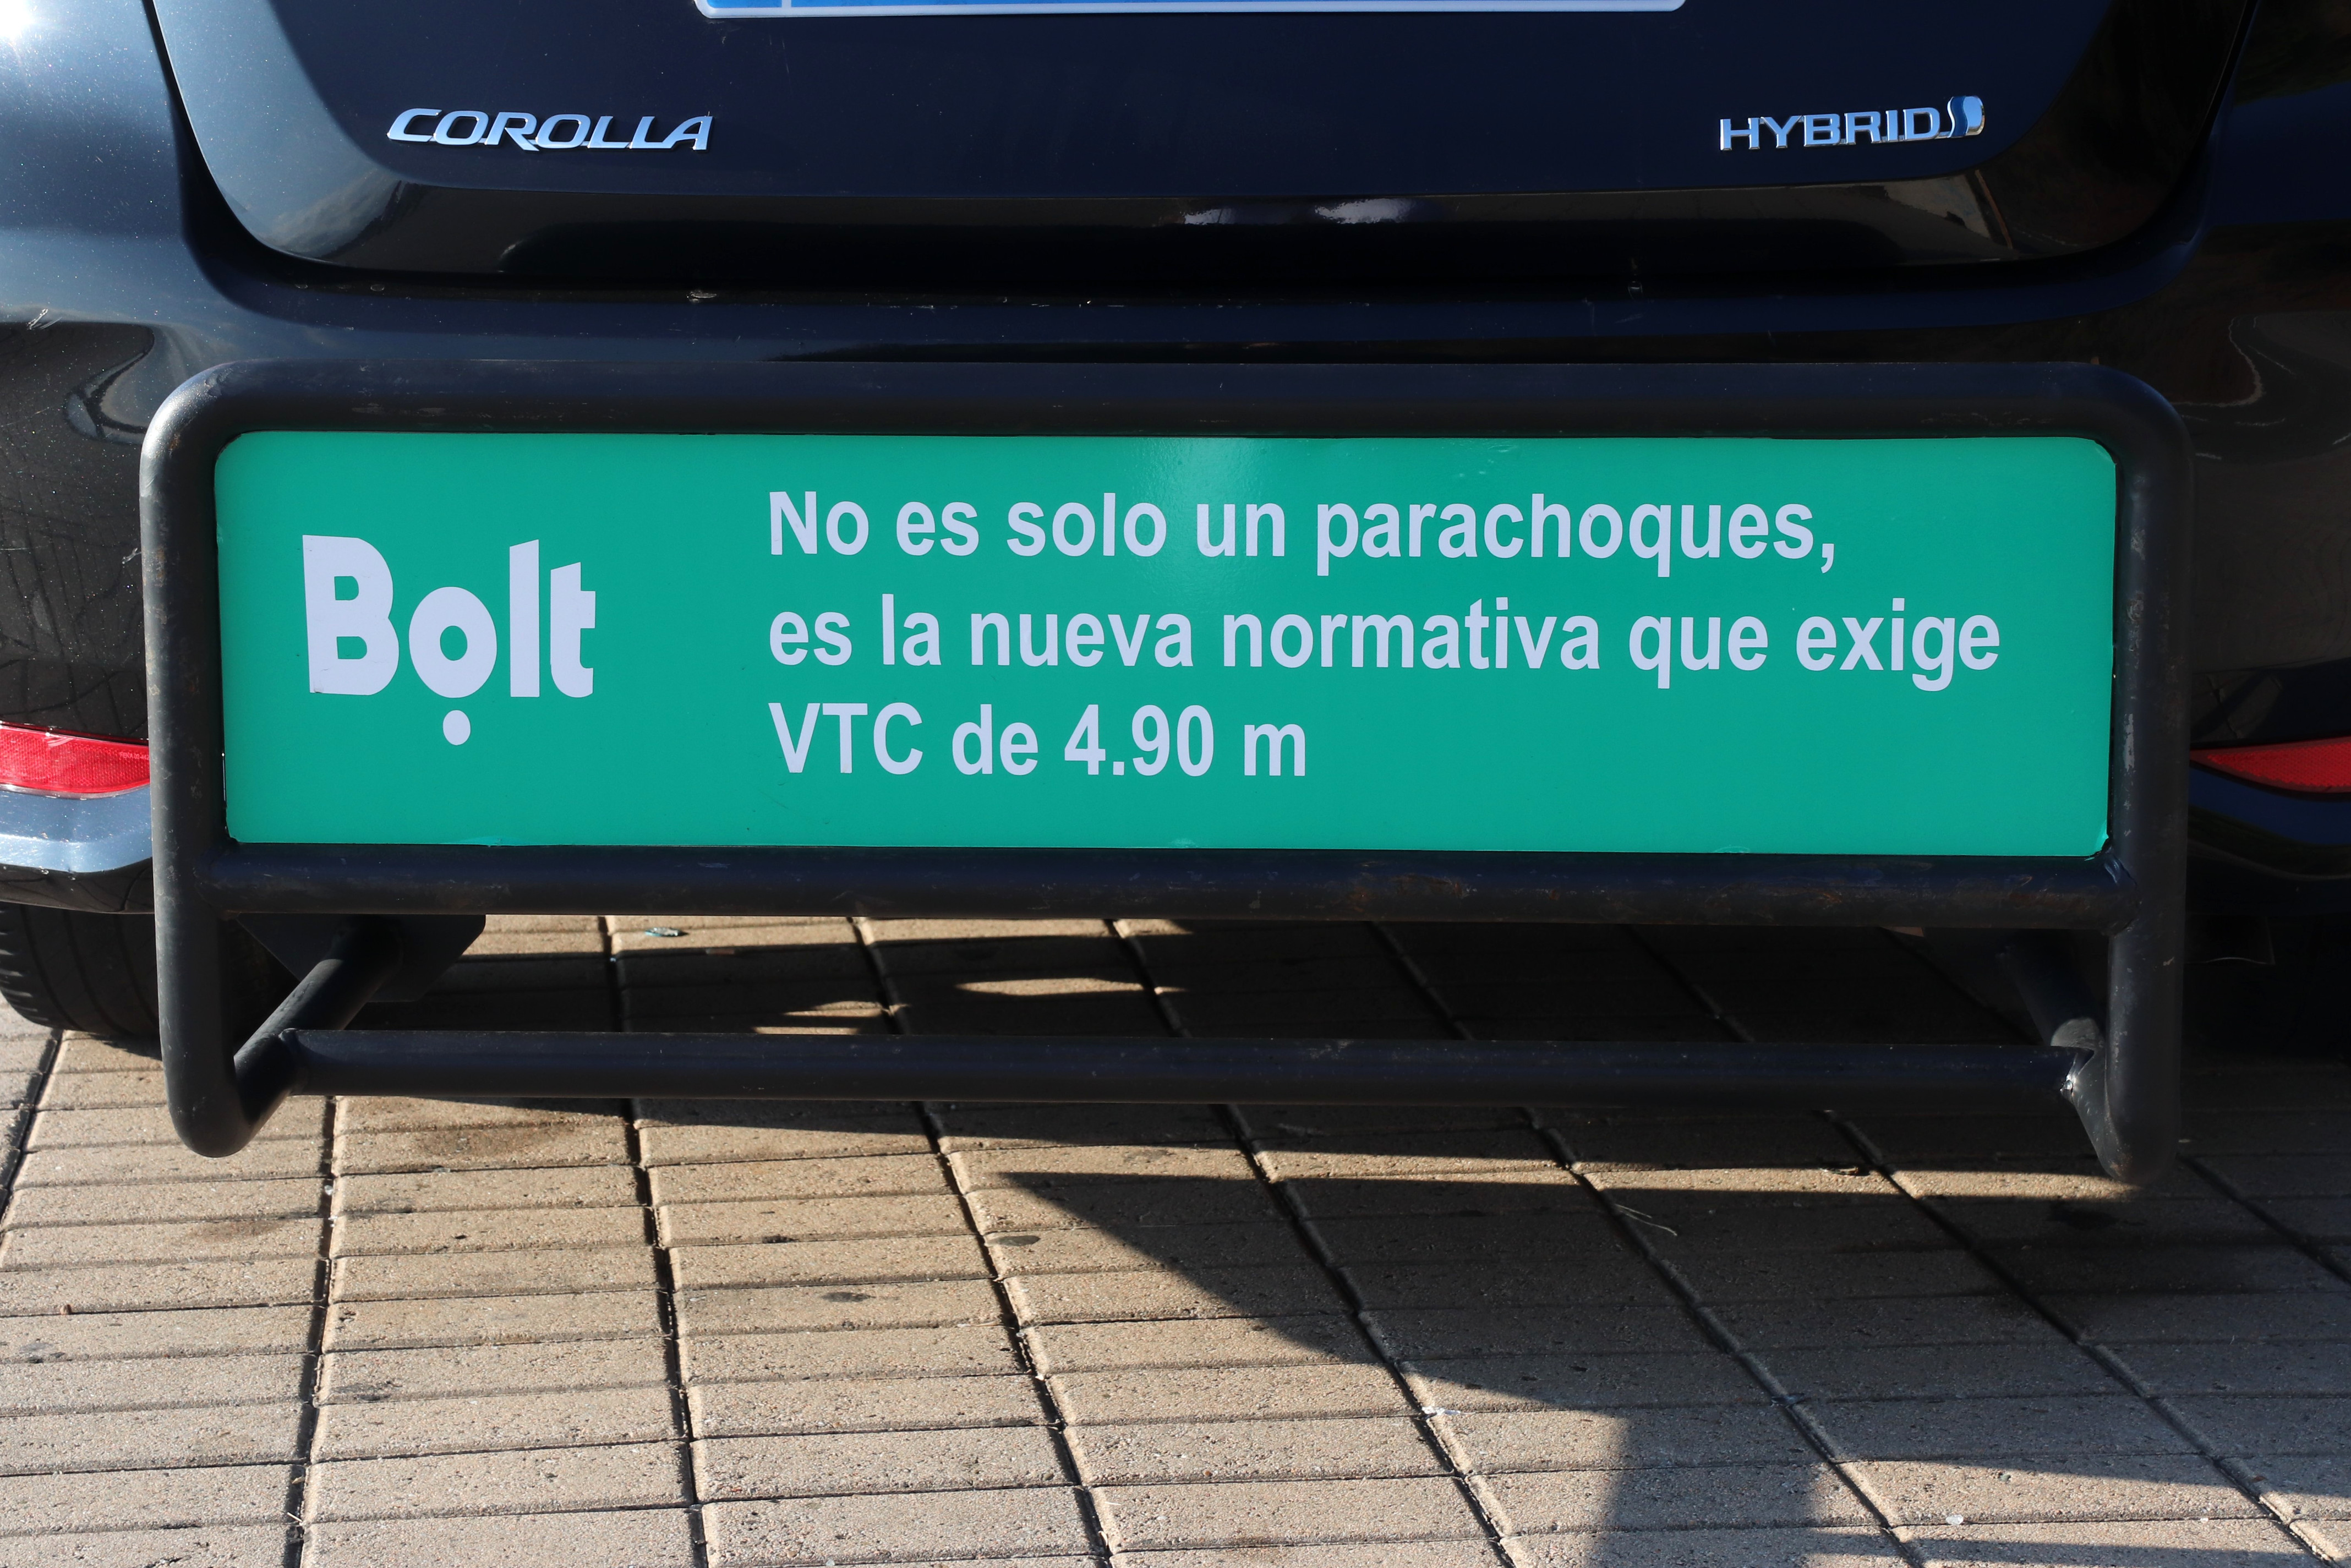 New bumper on Bolt vehicles to comply with Catalonia's ride-hailing regulation